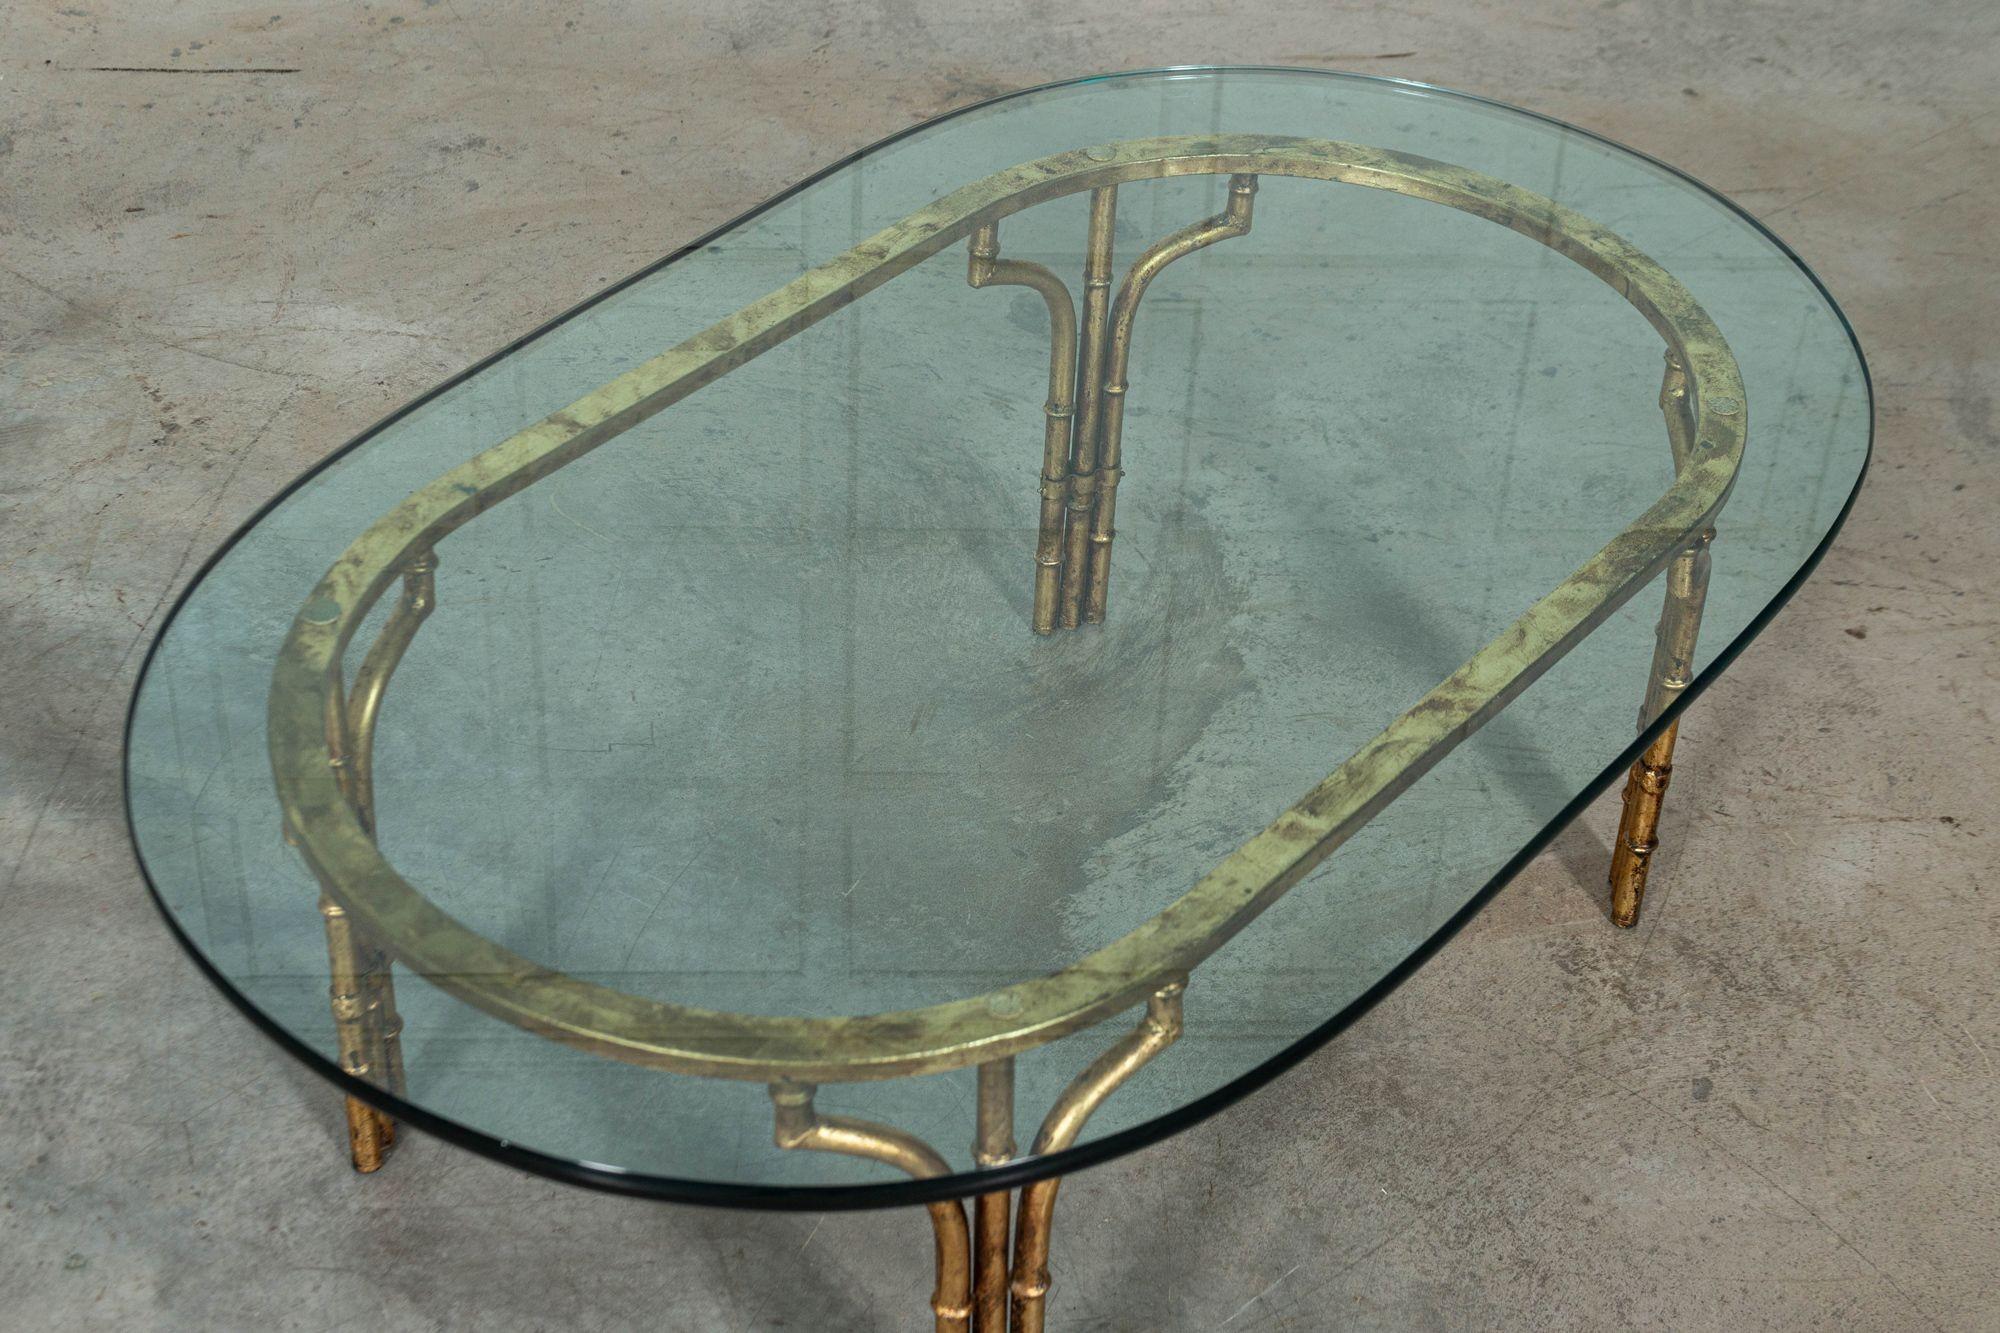 circa Mid-20th Century.
Maison Bagues Style Gilded Iron Faux Bamboo Coffee Table
sku 1472
W117 x D72 x H42 cm.